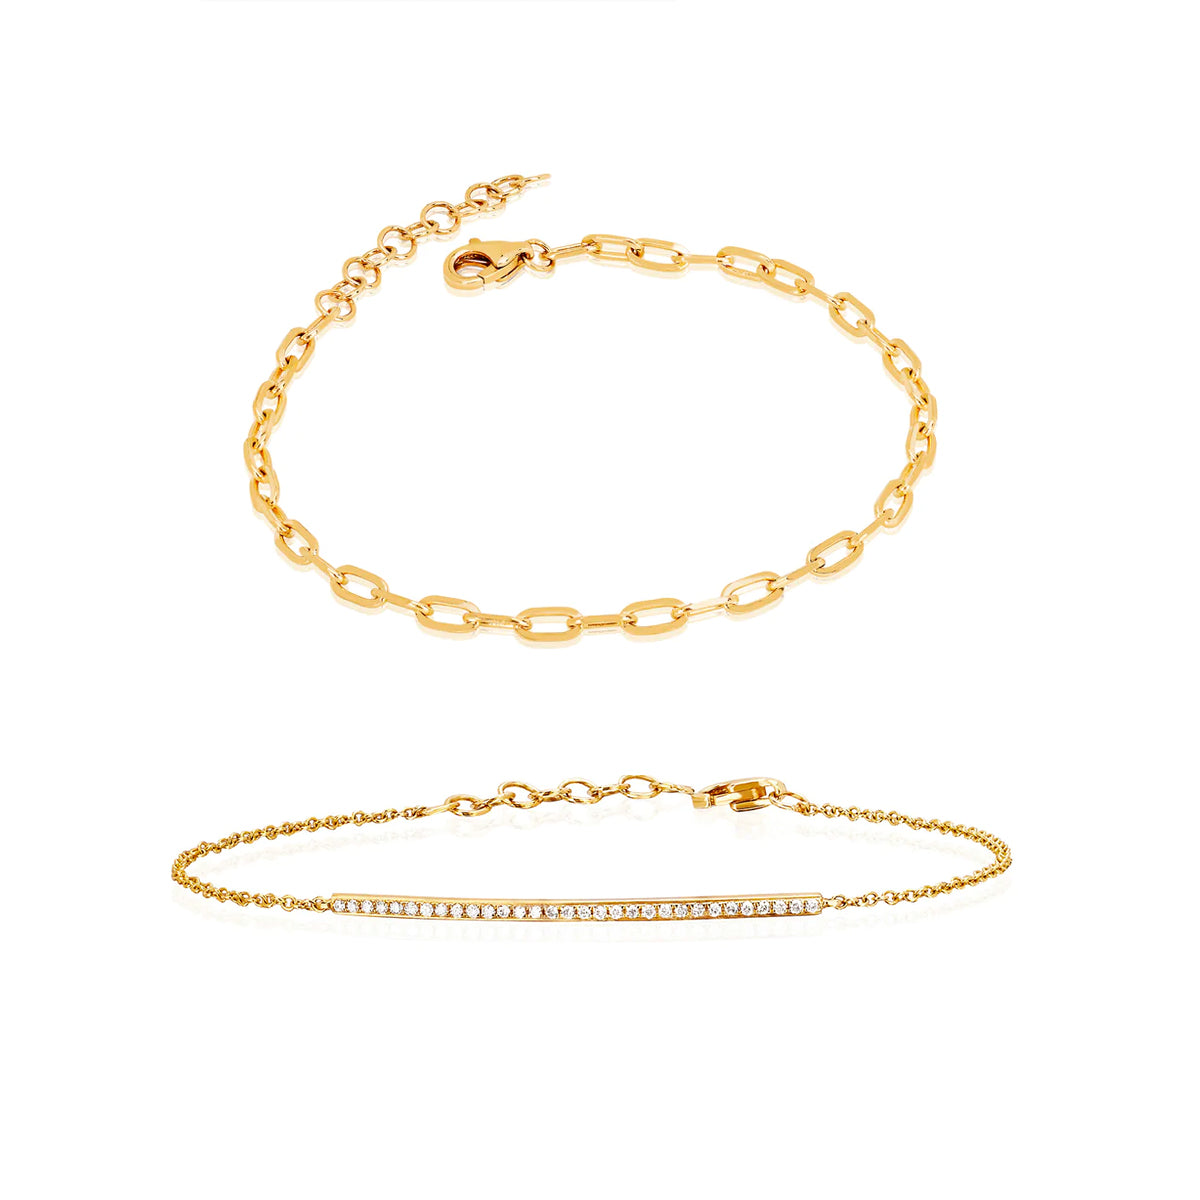 The Arm Candy Gift Set in 14k Yellow Gold